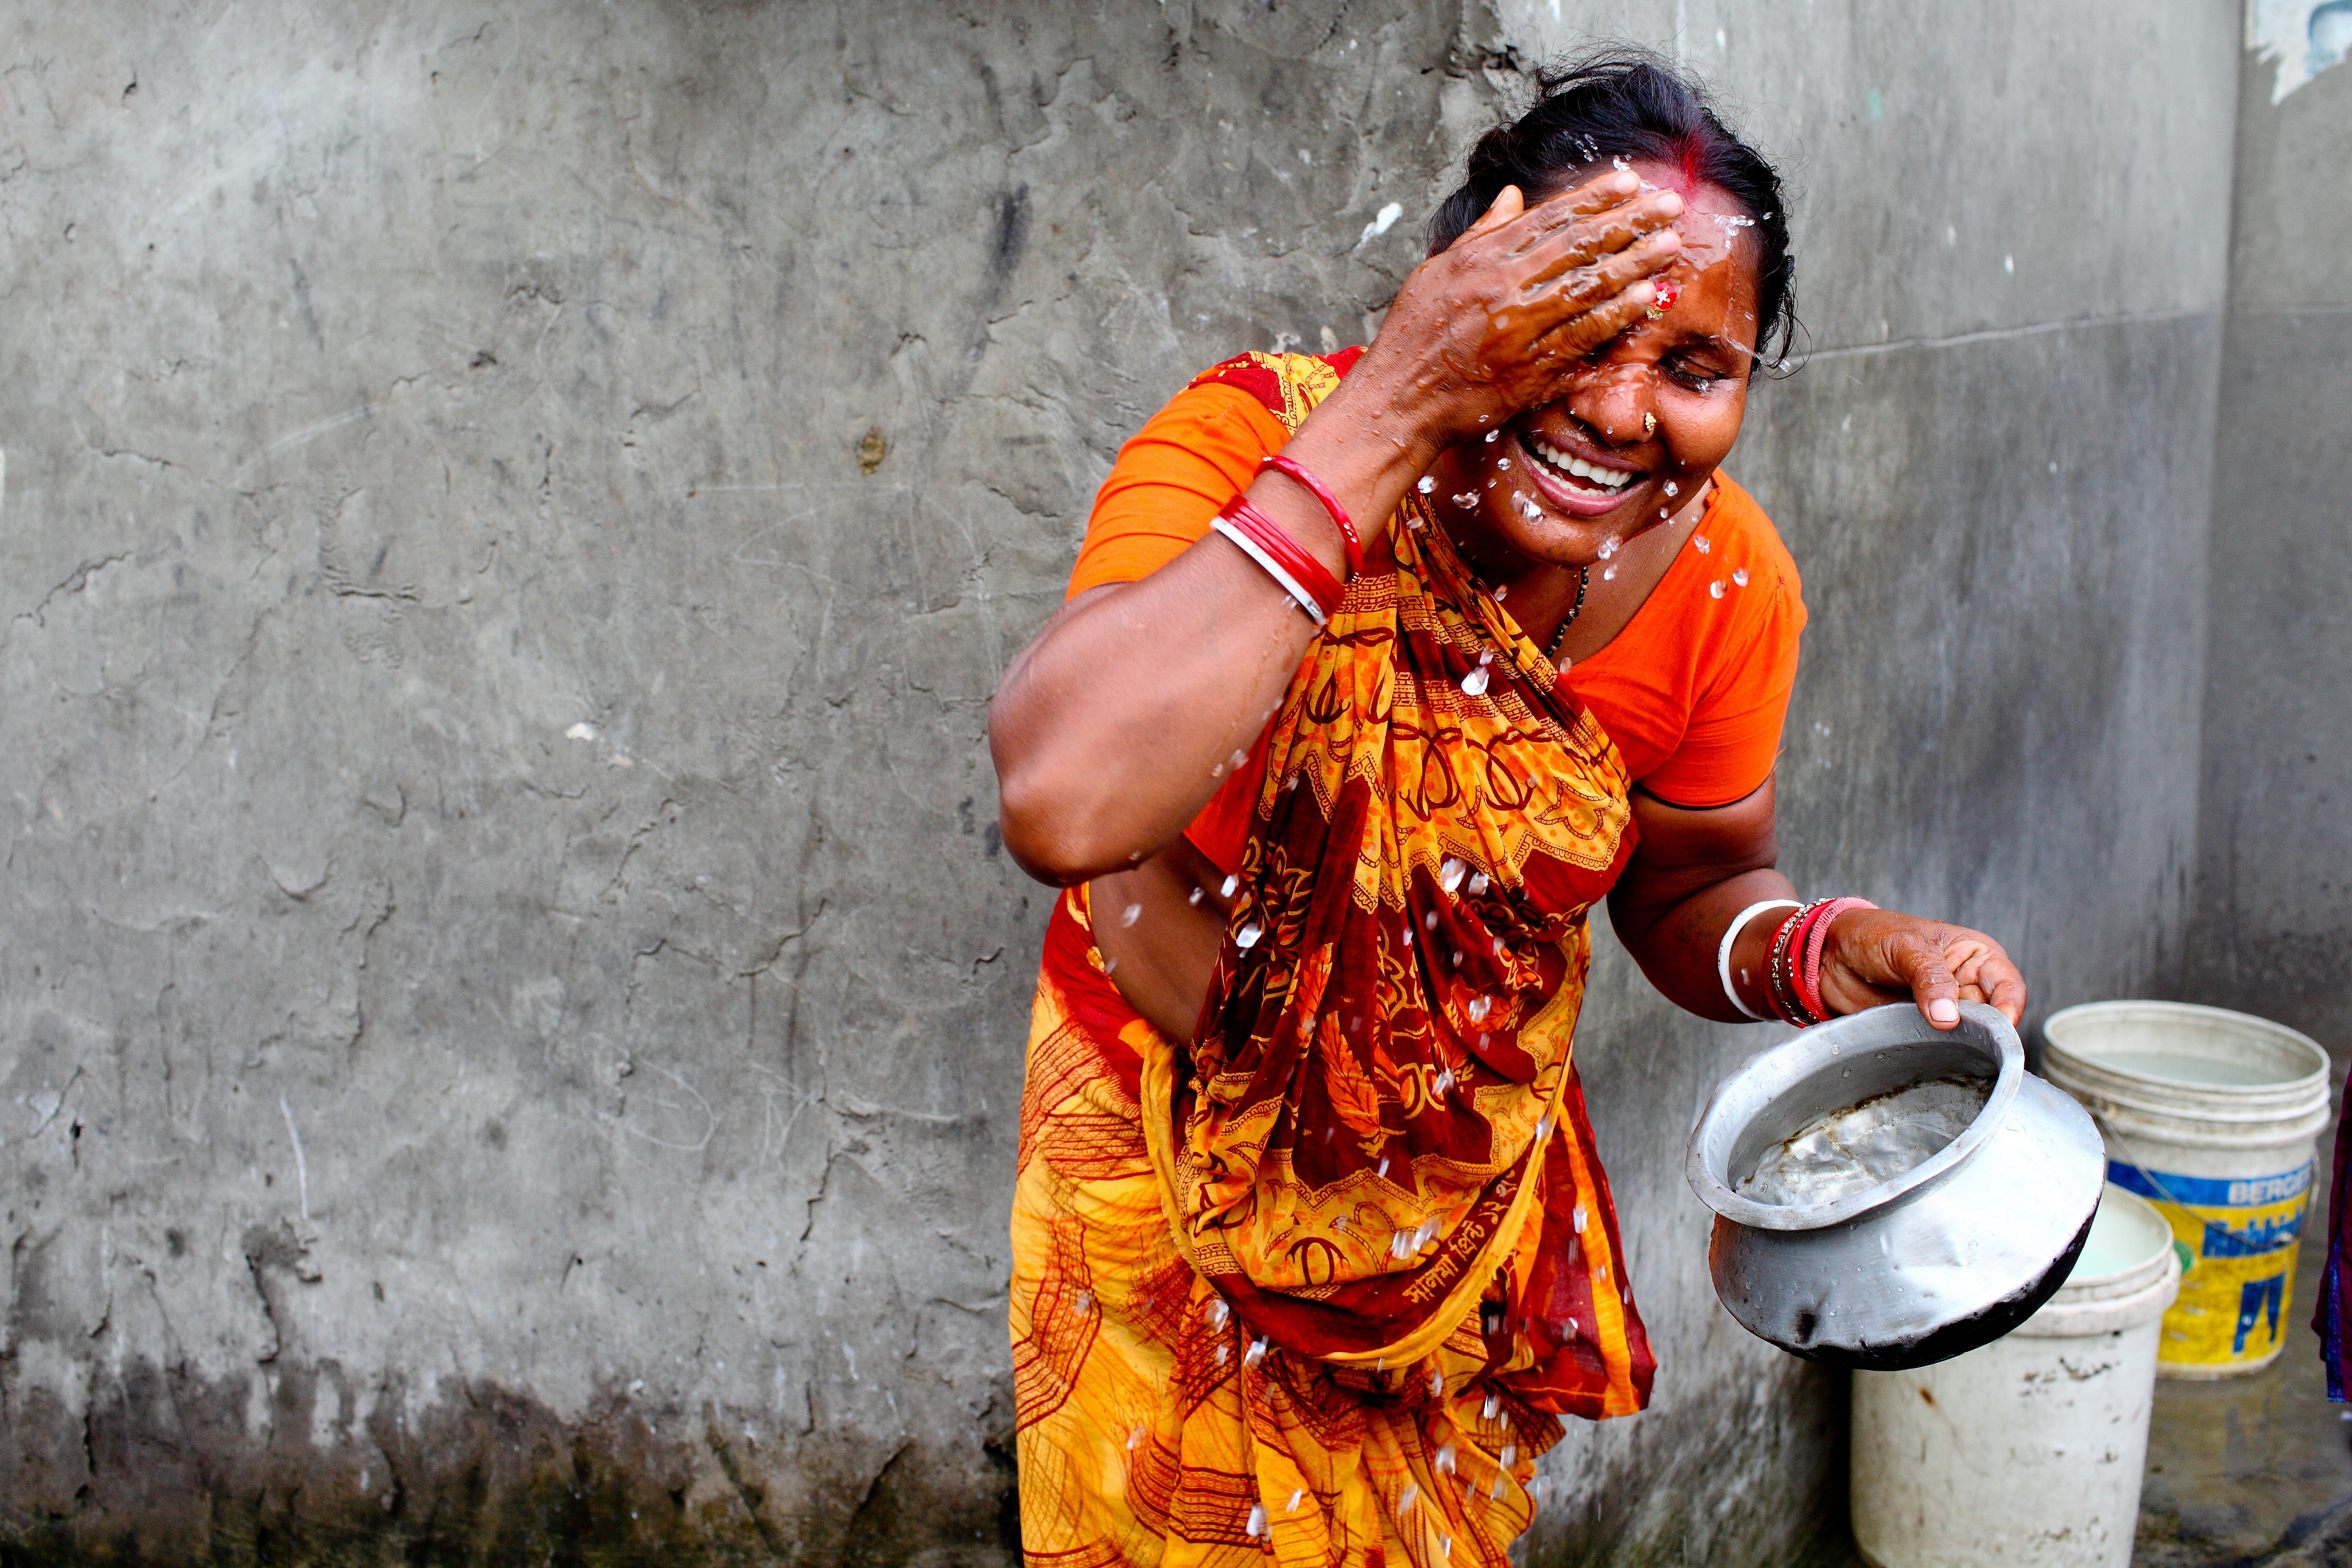 A woman is washing face early in the morning in TT Para Slum, Komlapur.